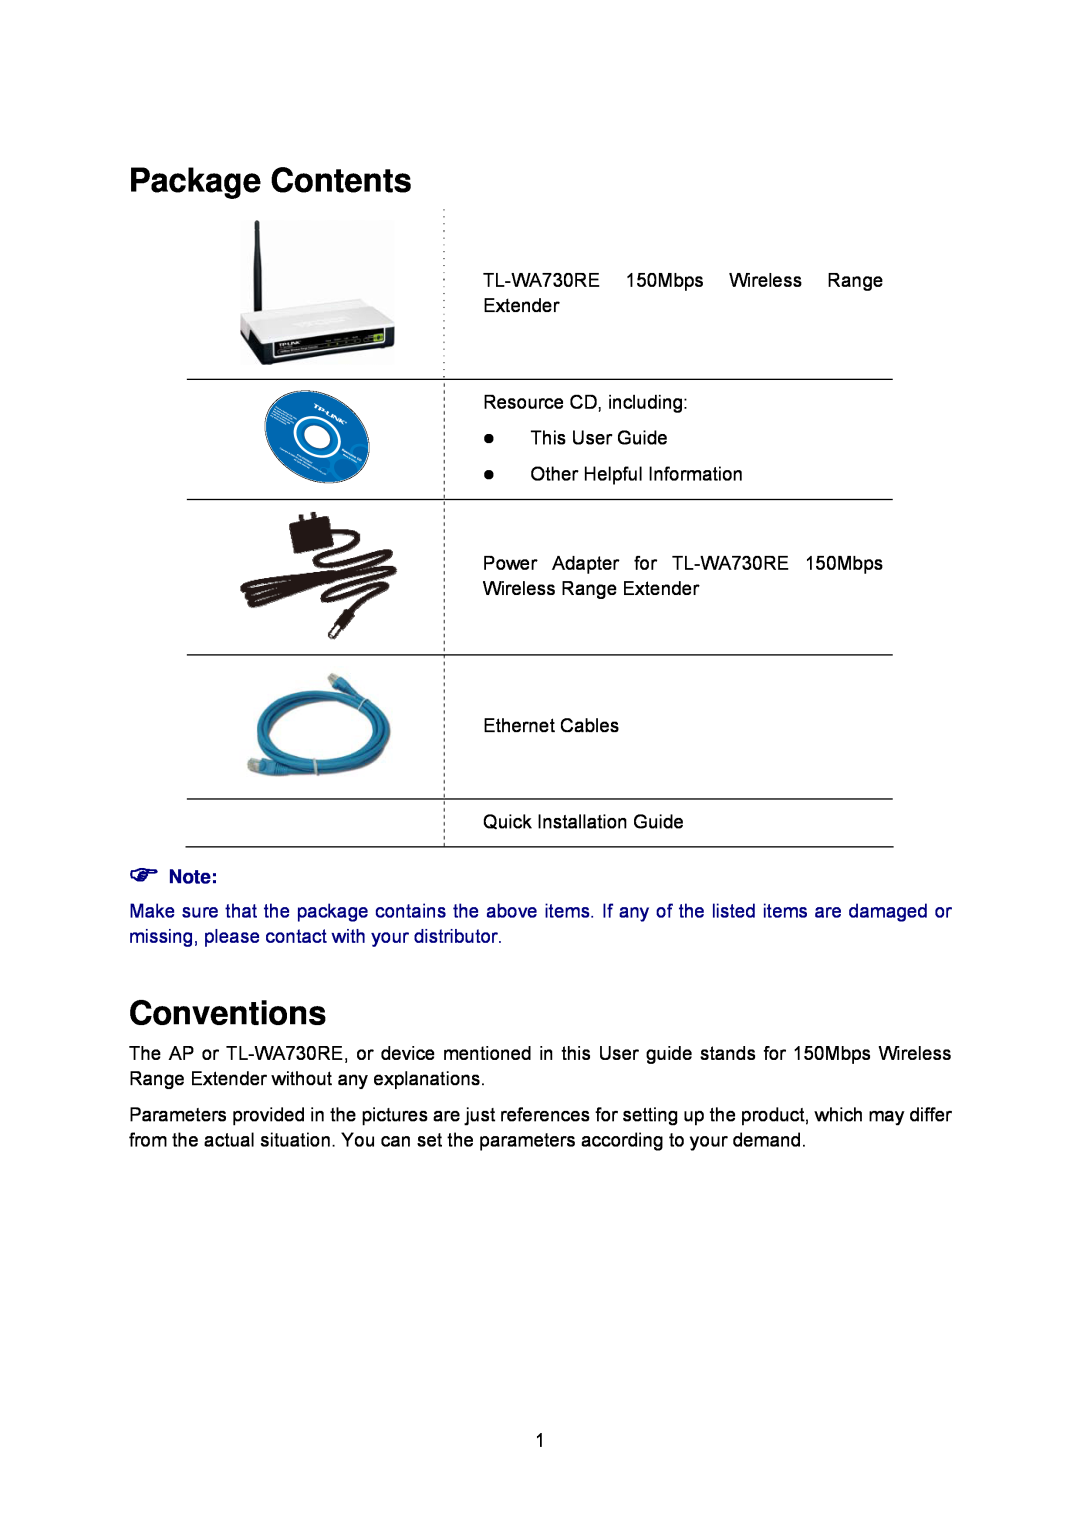 TP-Link TL-WA730RE manual Package Contents, Conventions 